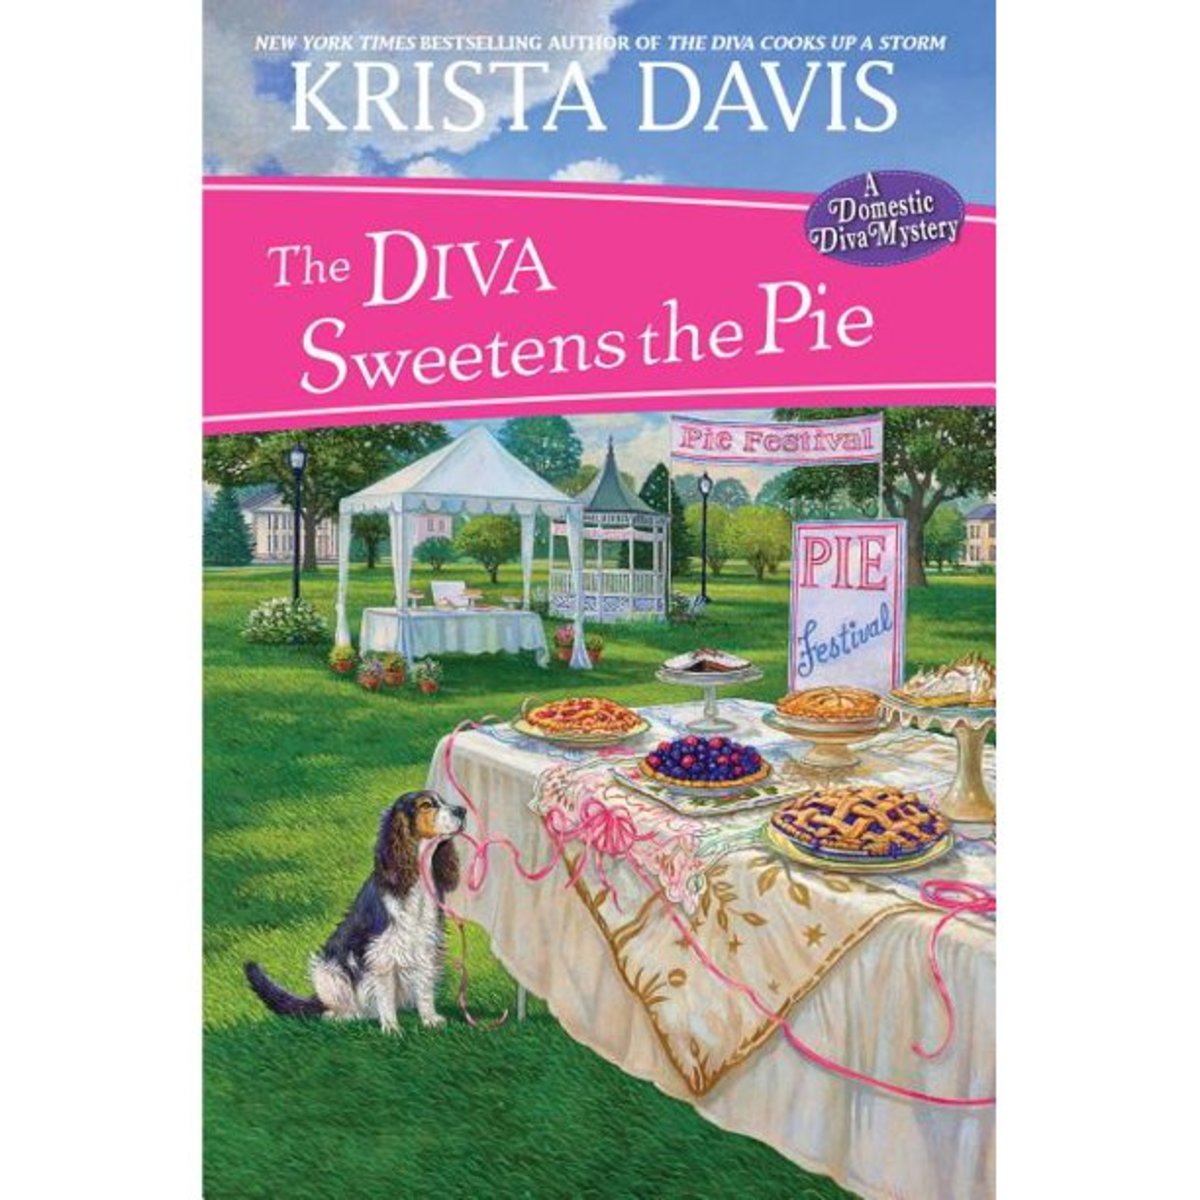 Book Review: The Diva Sweetens the Pie by Krista Davis